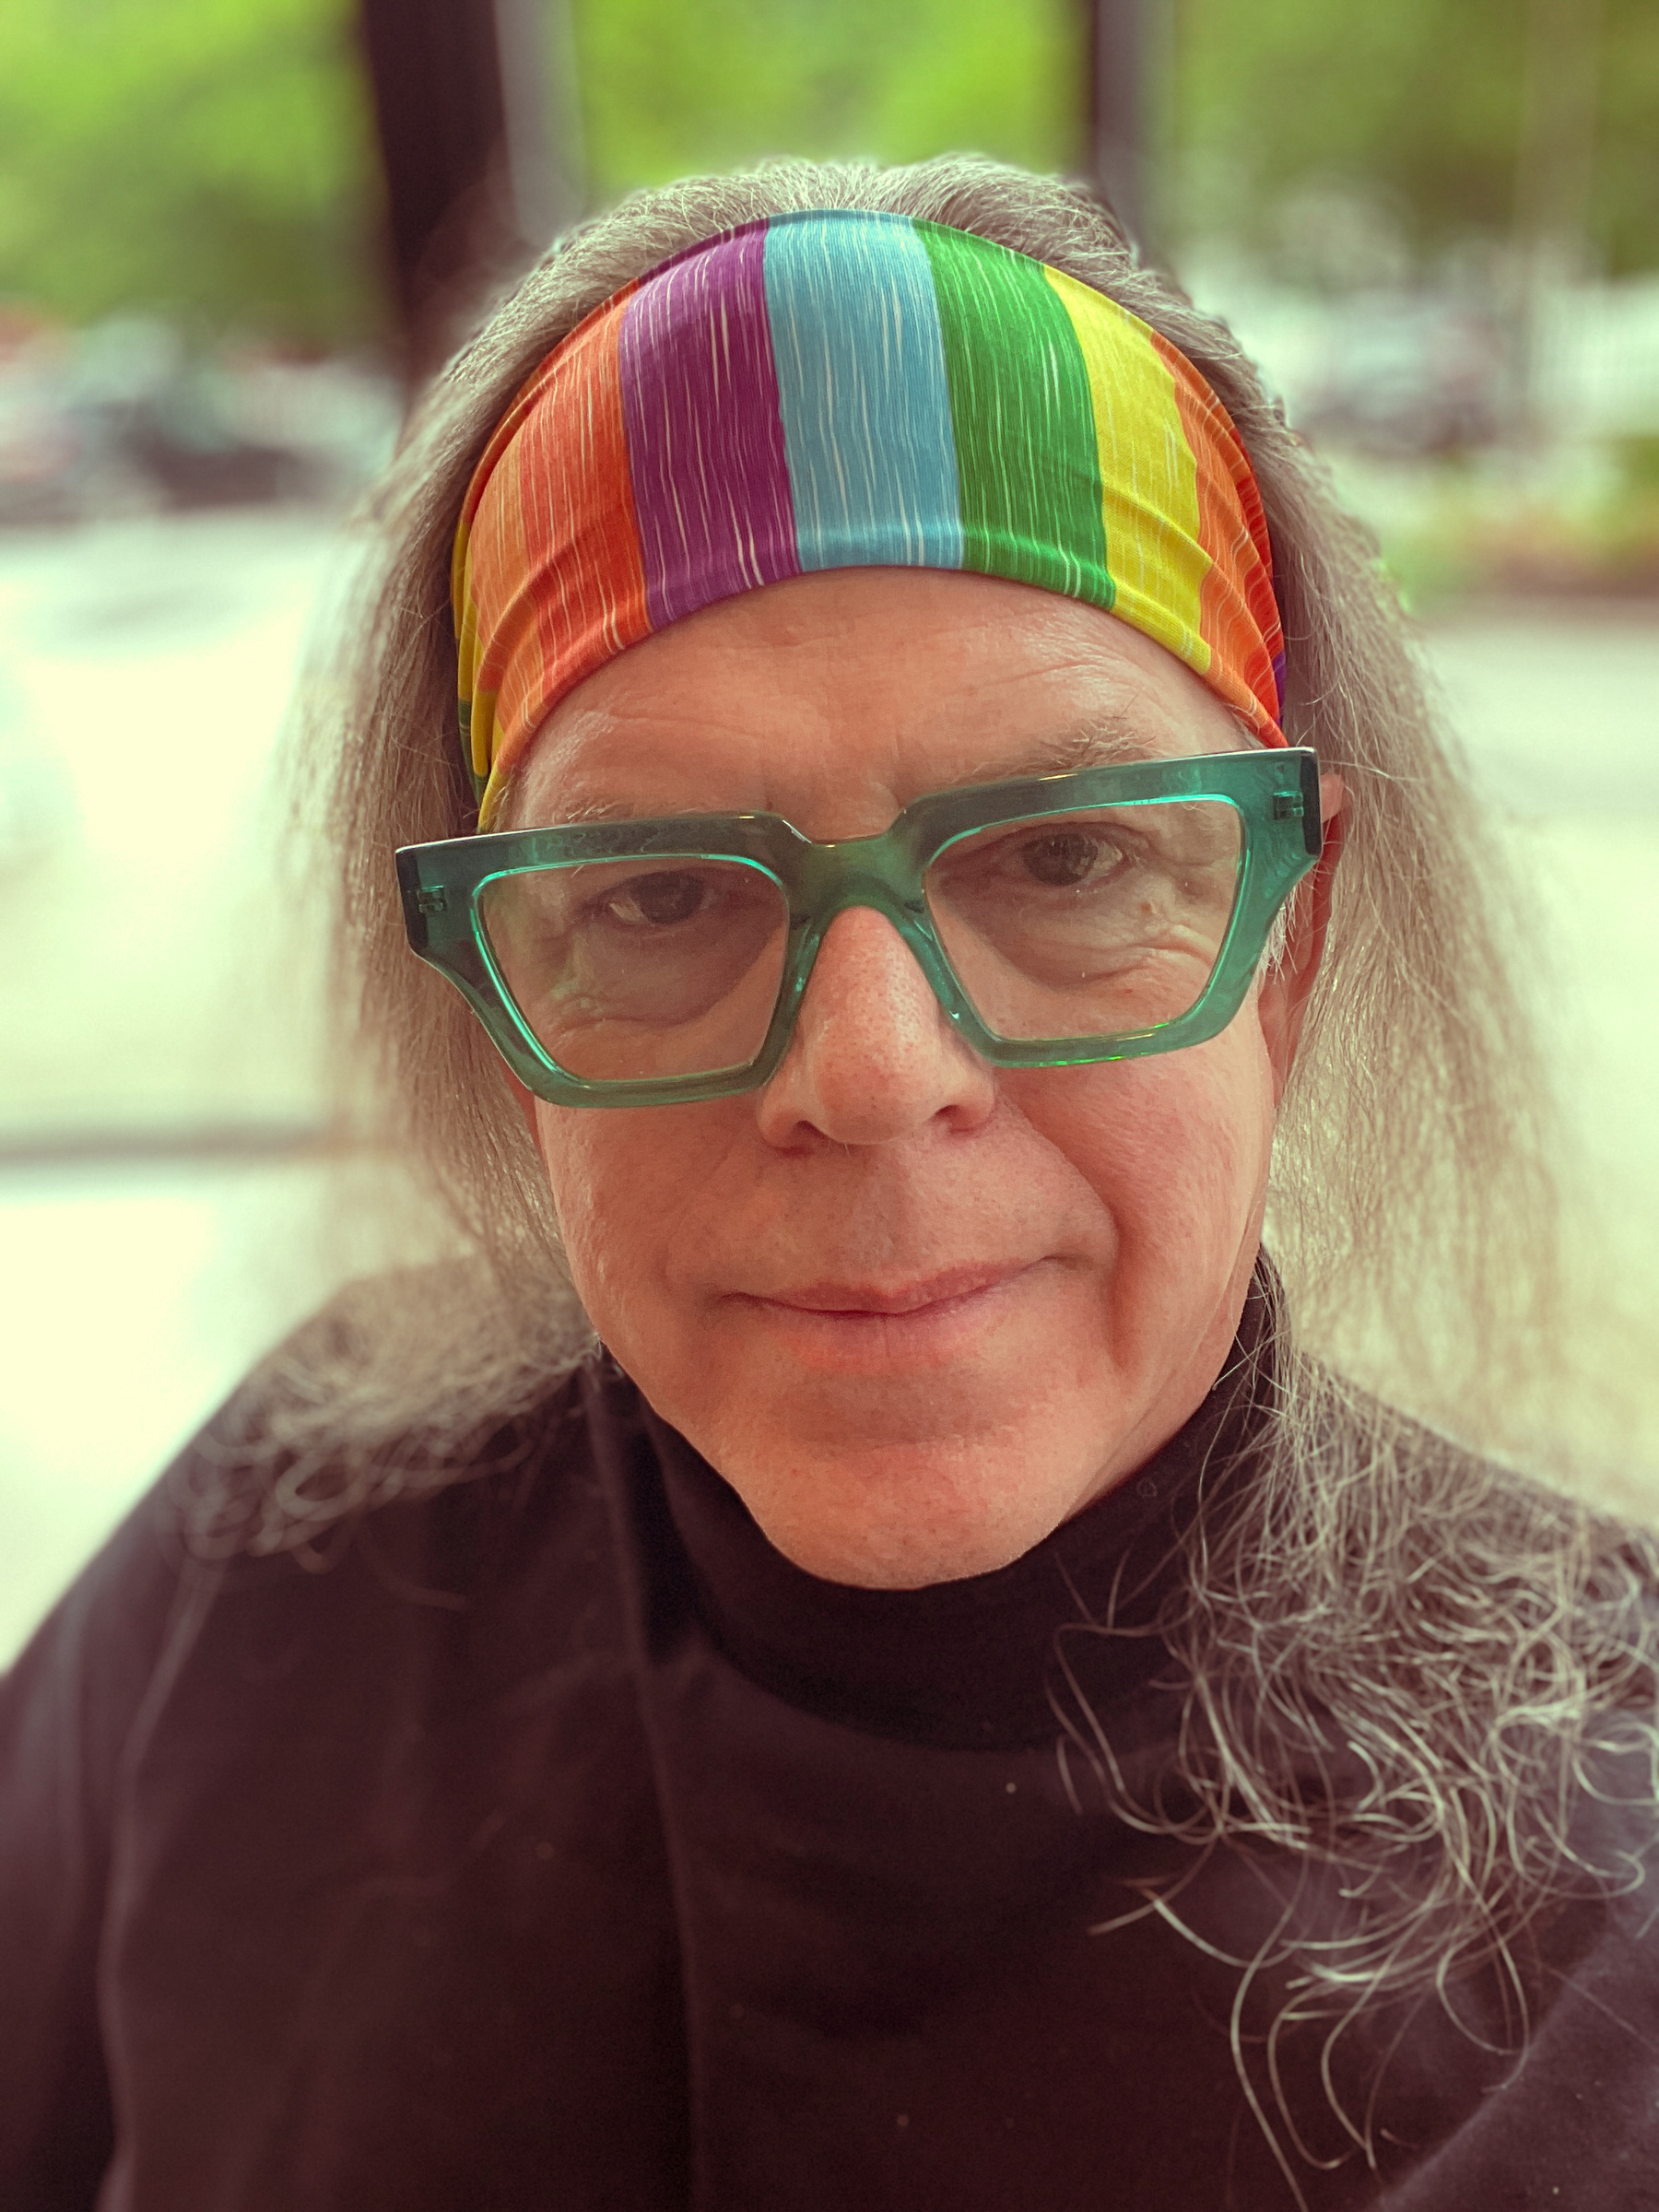 Headshot of a man wearing a rainbow striped head band. He has hair down to his shoulders and bold green crystal frame glasses on. He is wearing a black turtleneck.